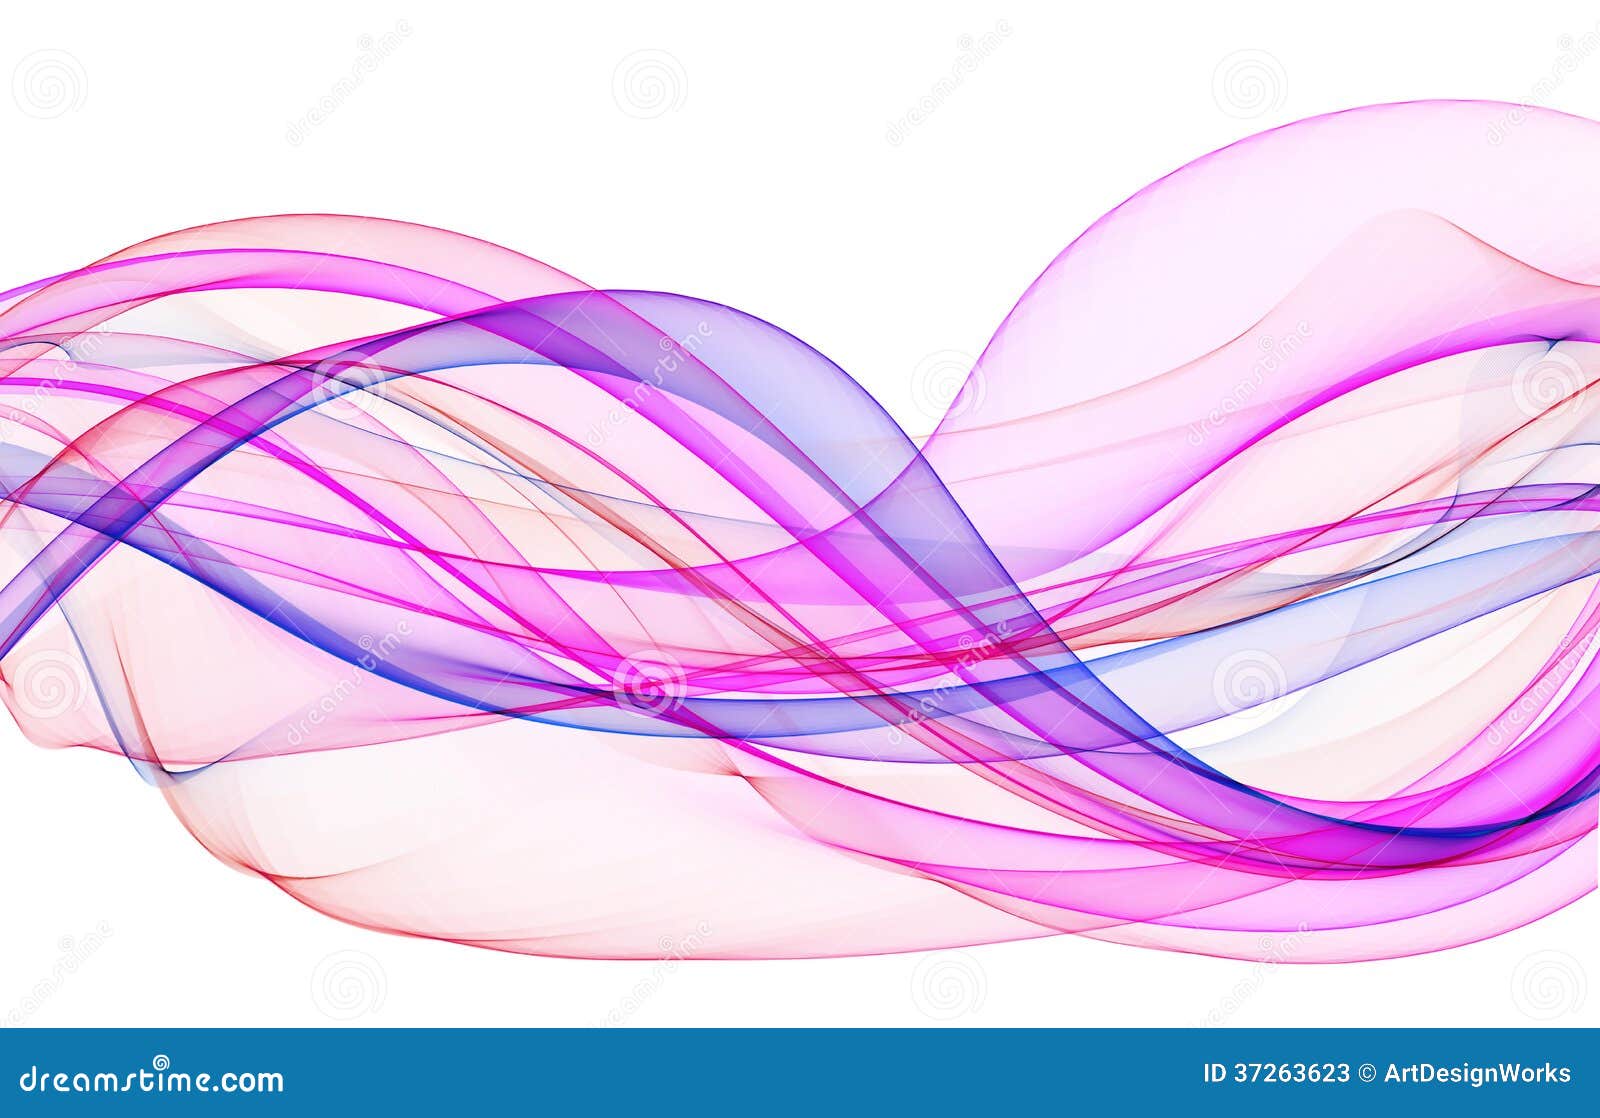 beautiful abstract pink waves background flame 